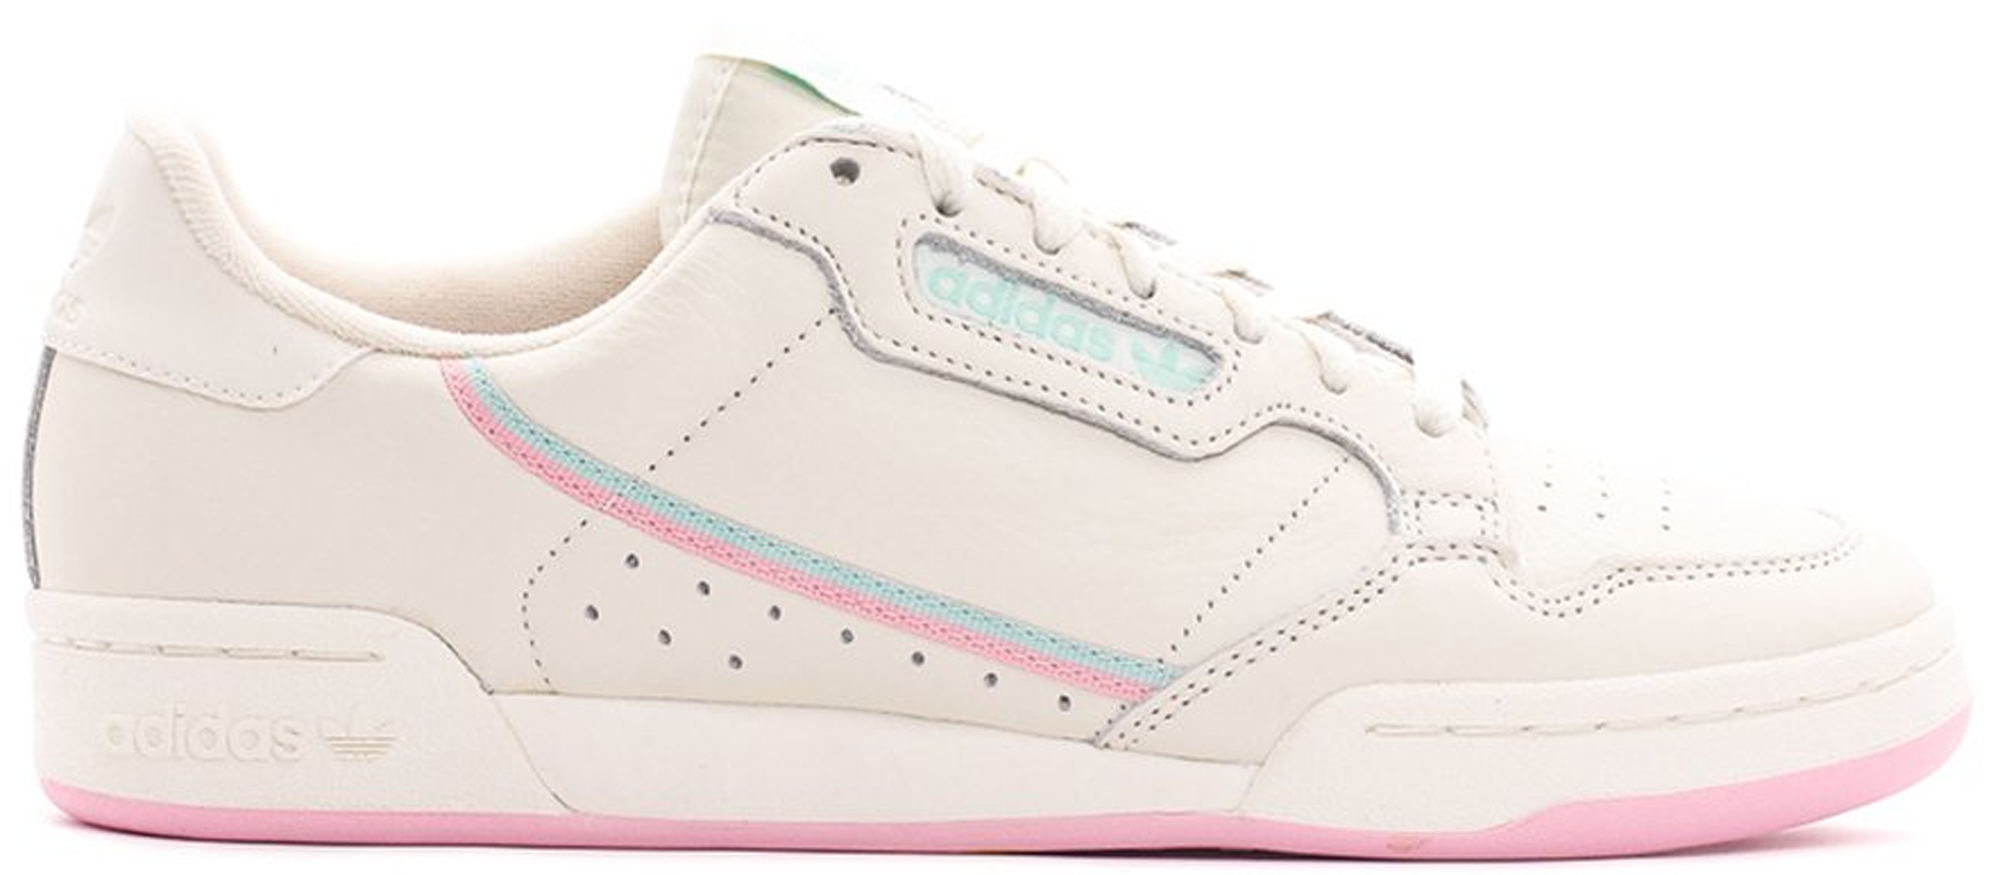 adidas continental 80 pink and blue